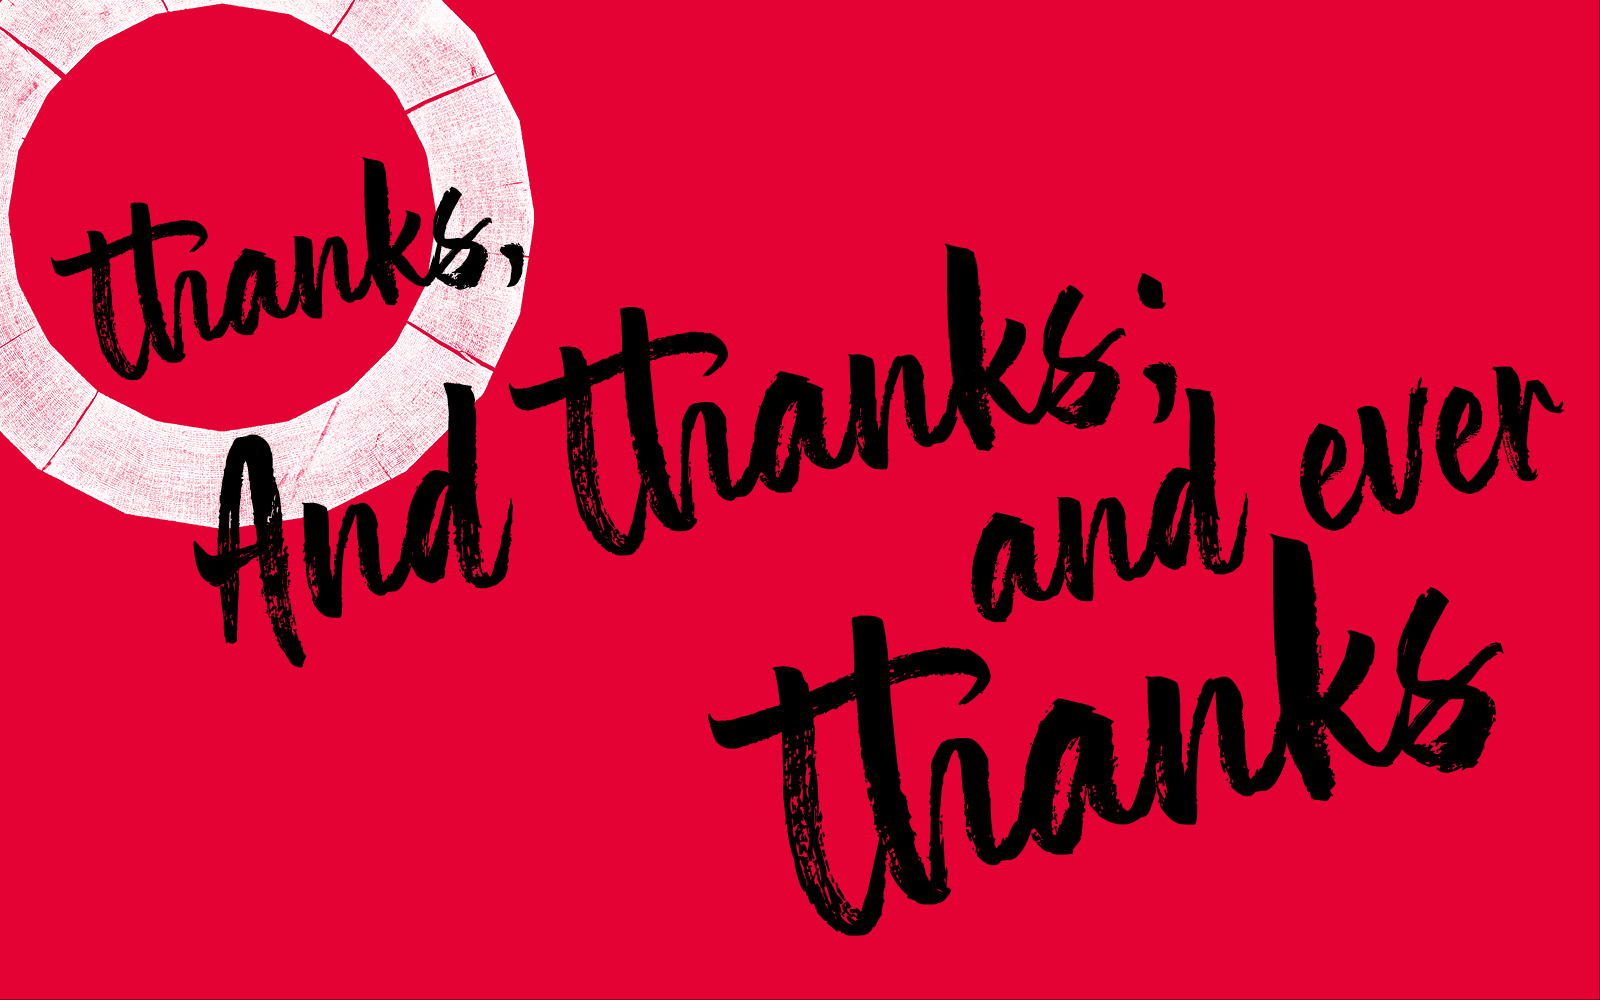 The words 'thanks and thanks and ever thanks' on a red background